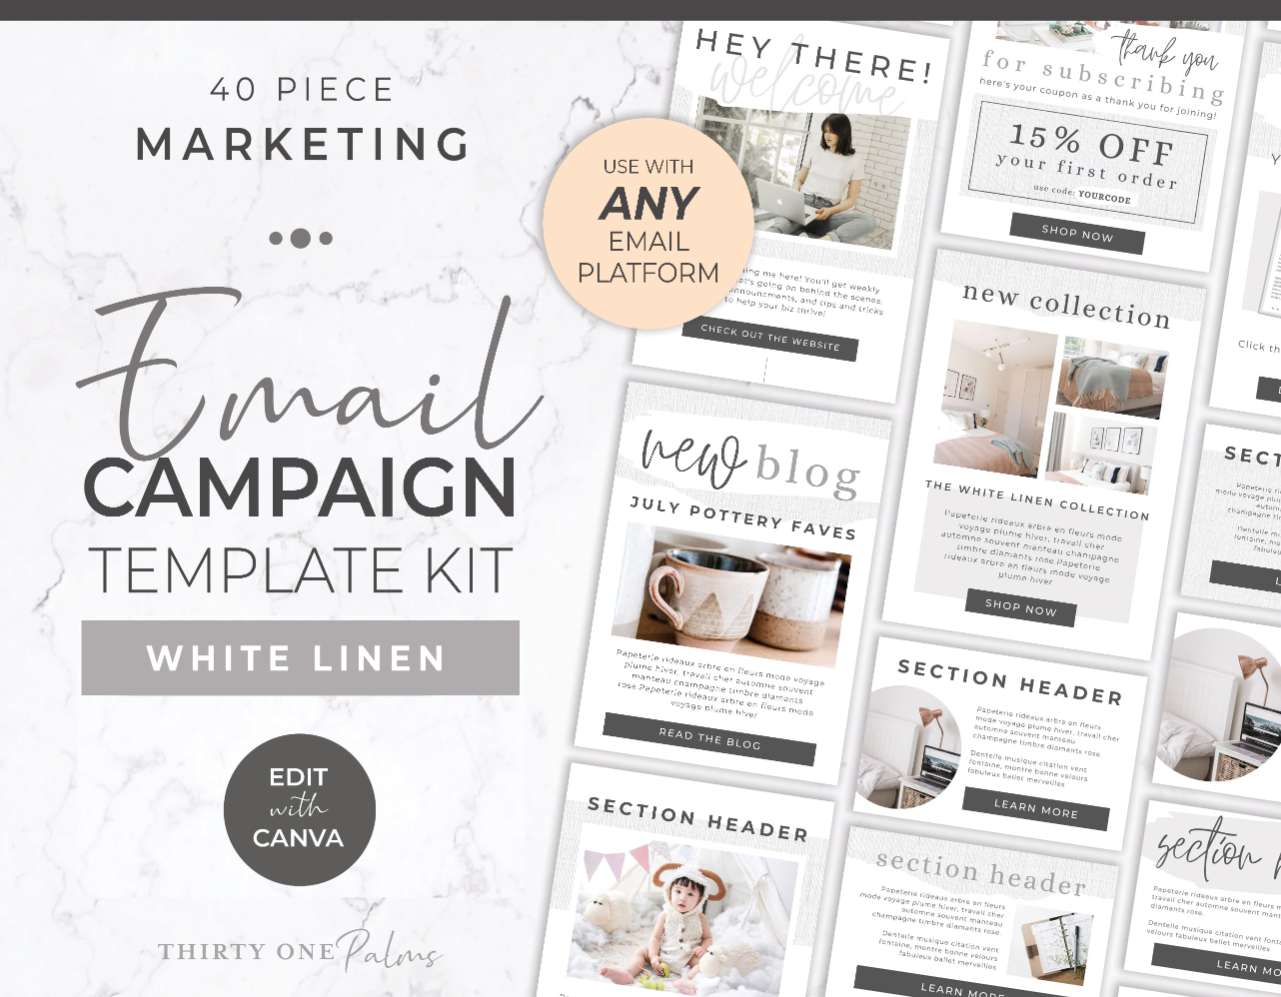 Email Marketing Campaign Template Kit – White Linen